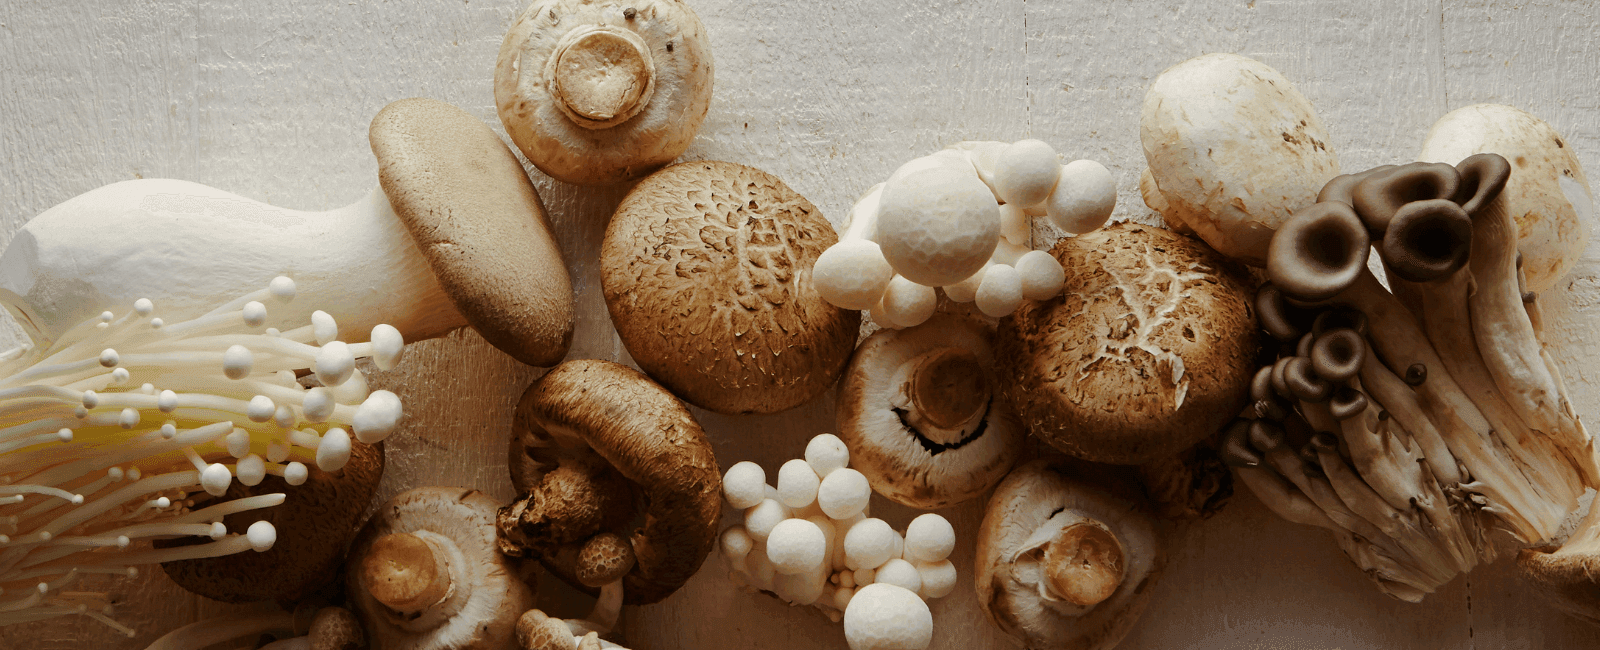 The Heath Benefits of Mushrooms: How Fungi Fuel Health and Fight Disease